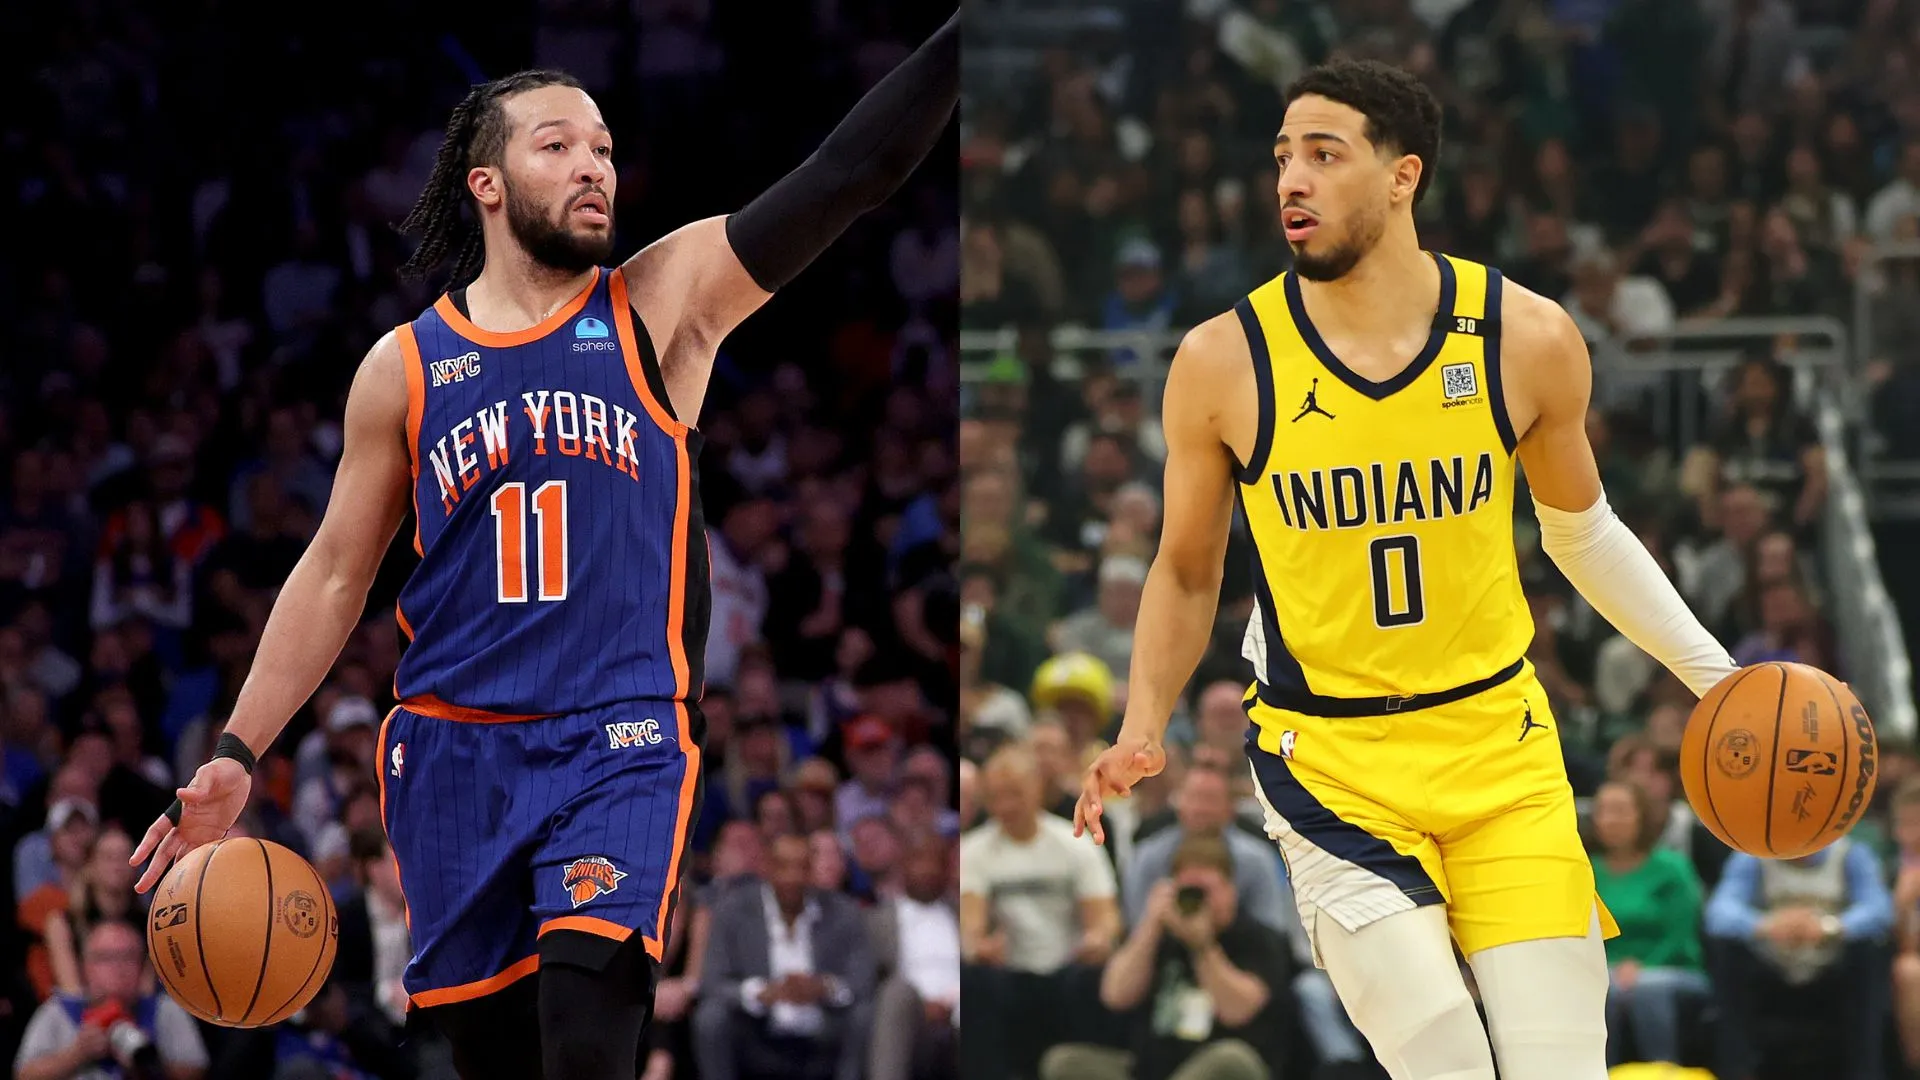 Pacers Race Past Knicks in Game 4: A Dominant Win Sets Up Tough Madison Square Garden Return